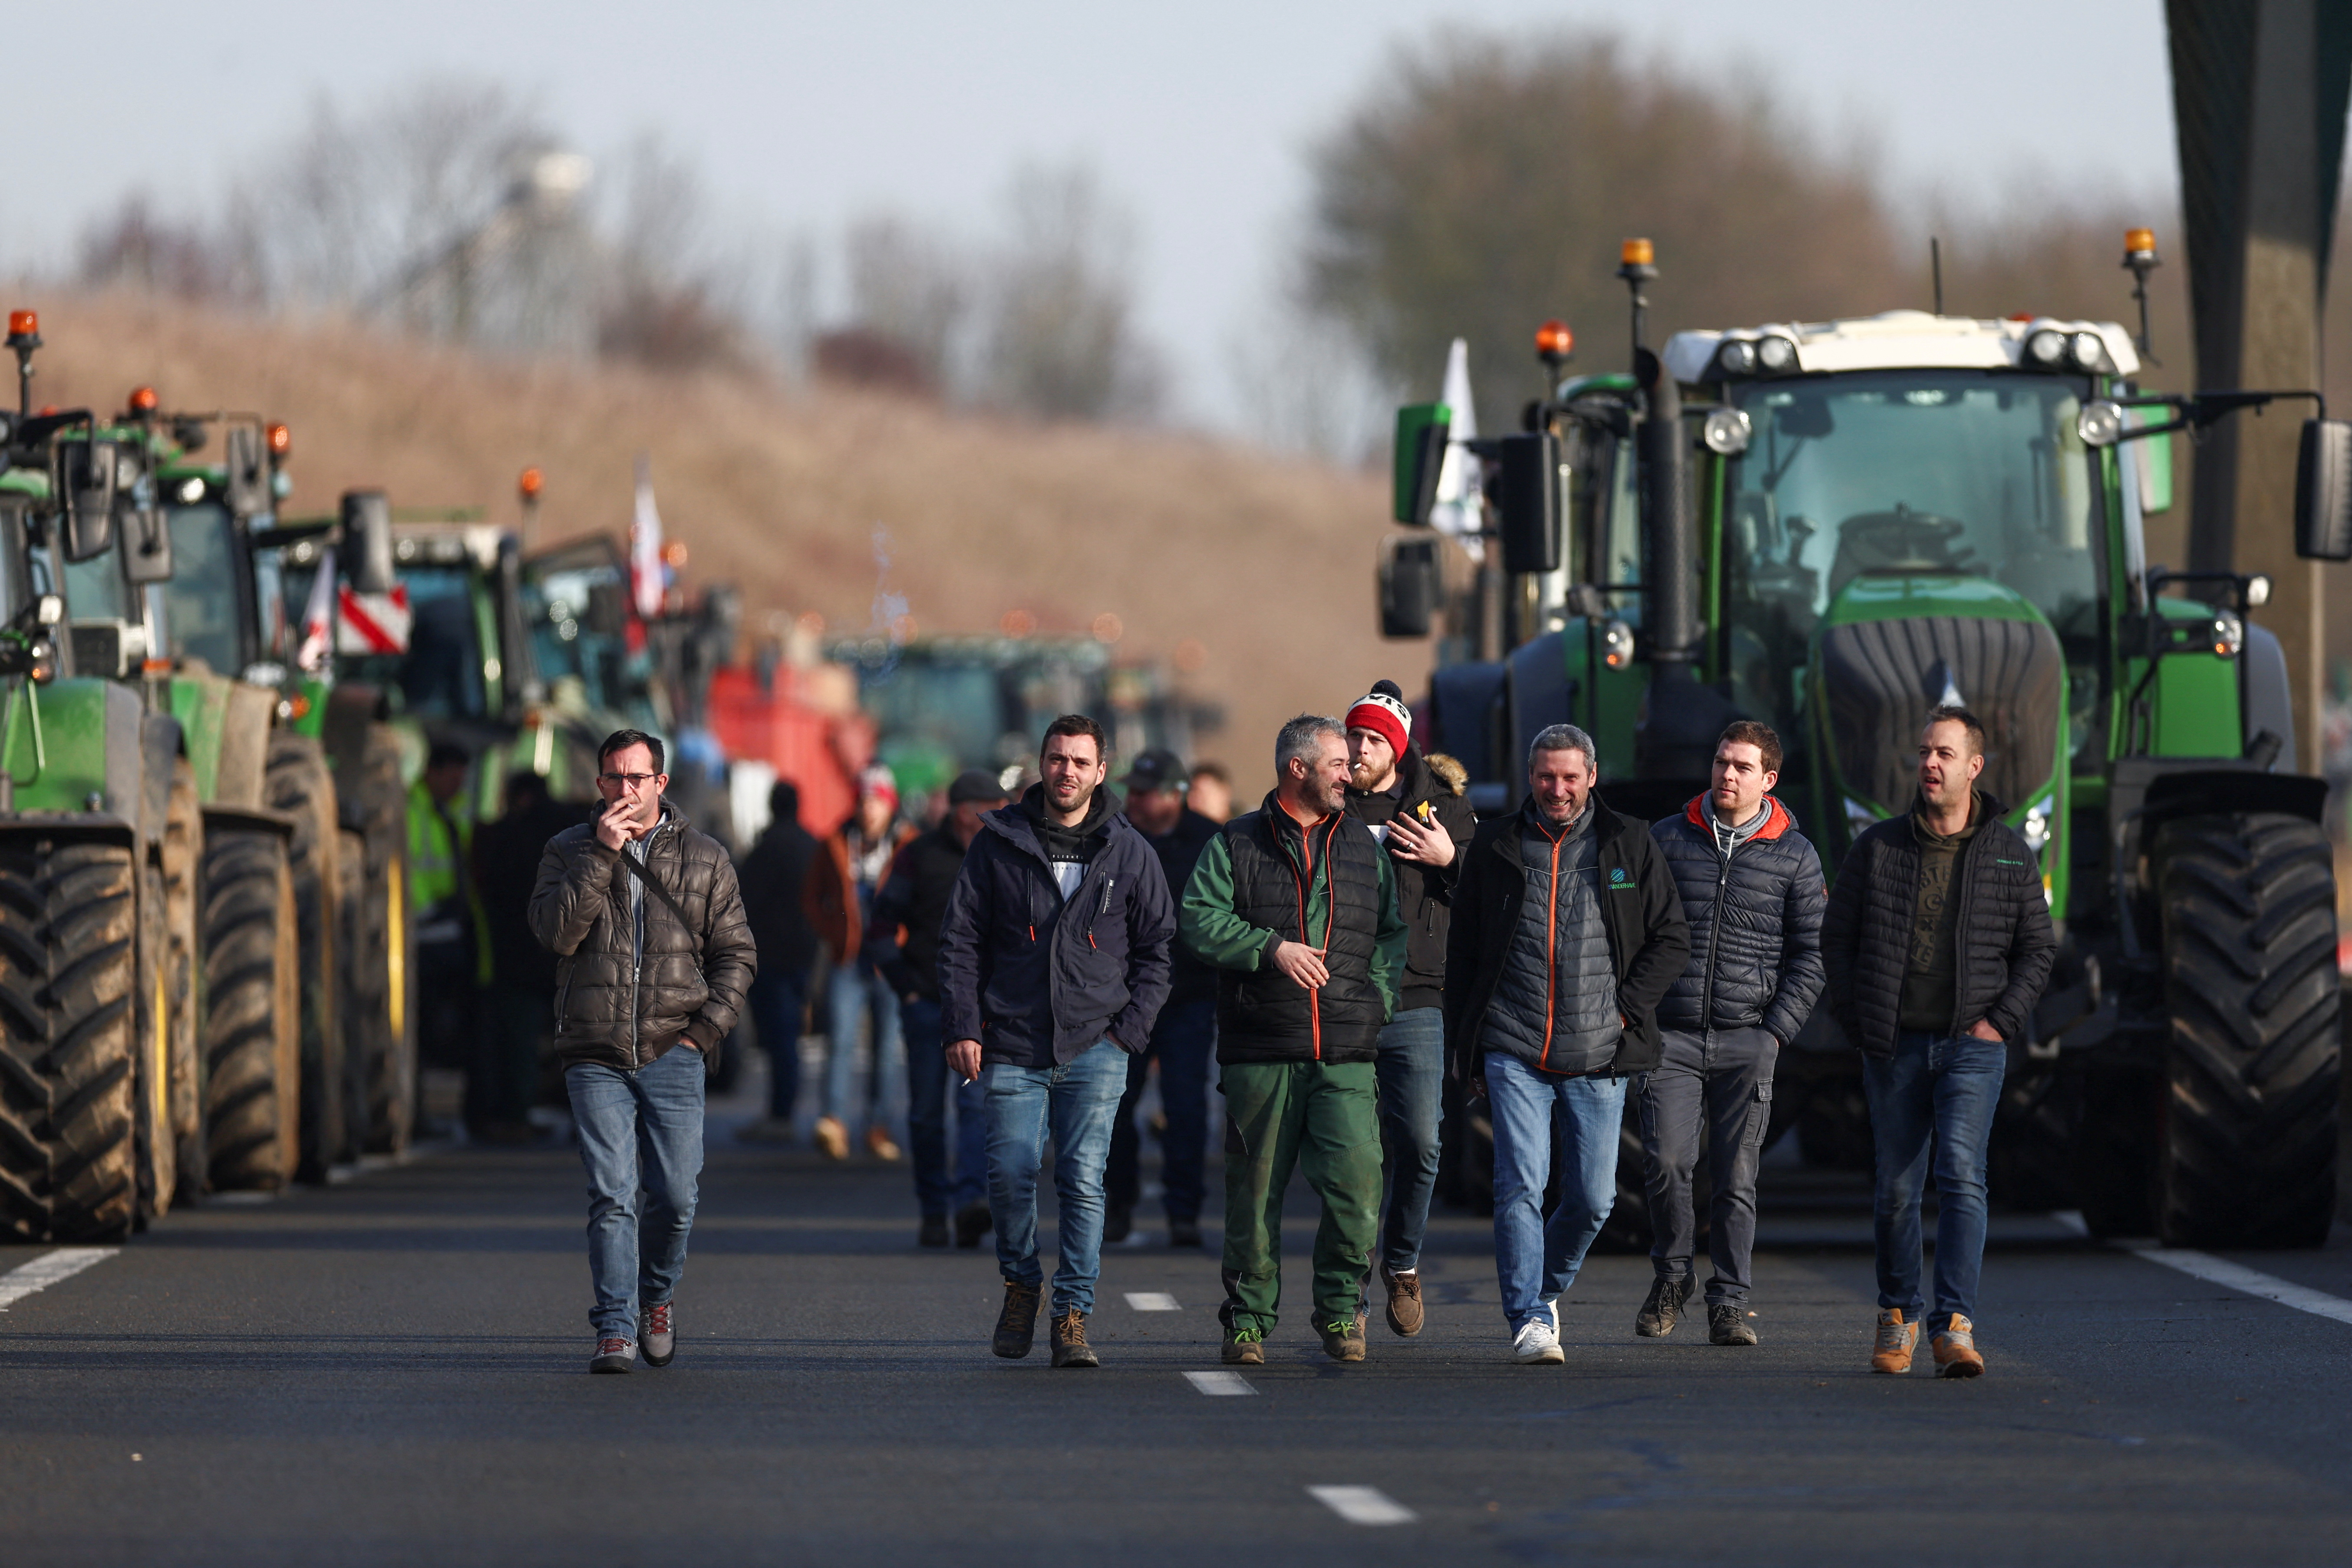 Farmers protest over price pressures, taxes, and green regulation in Beauvais